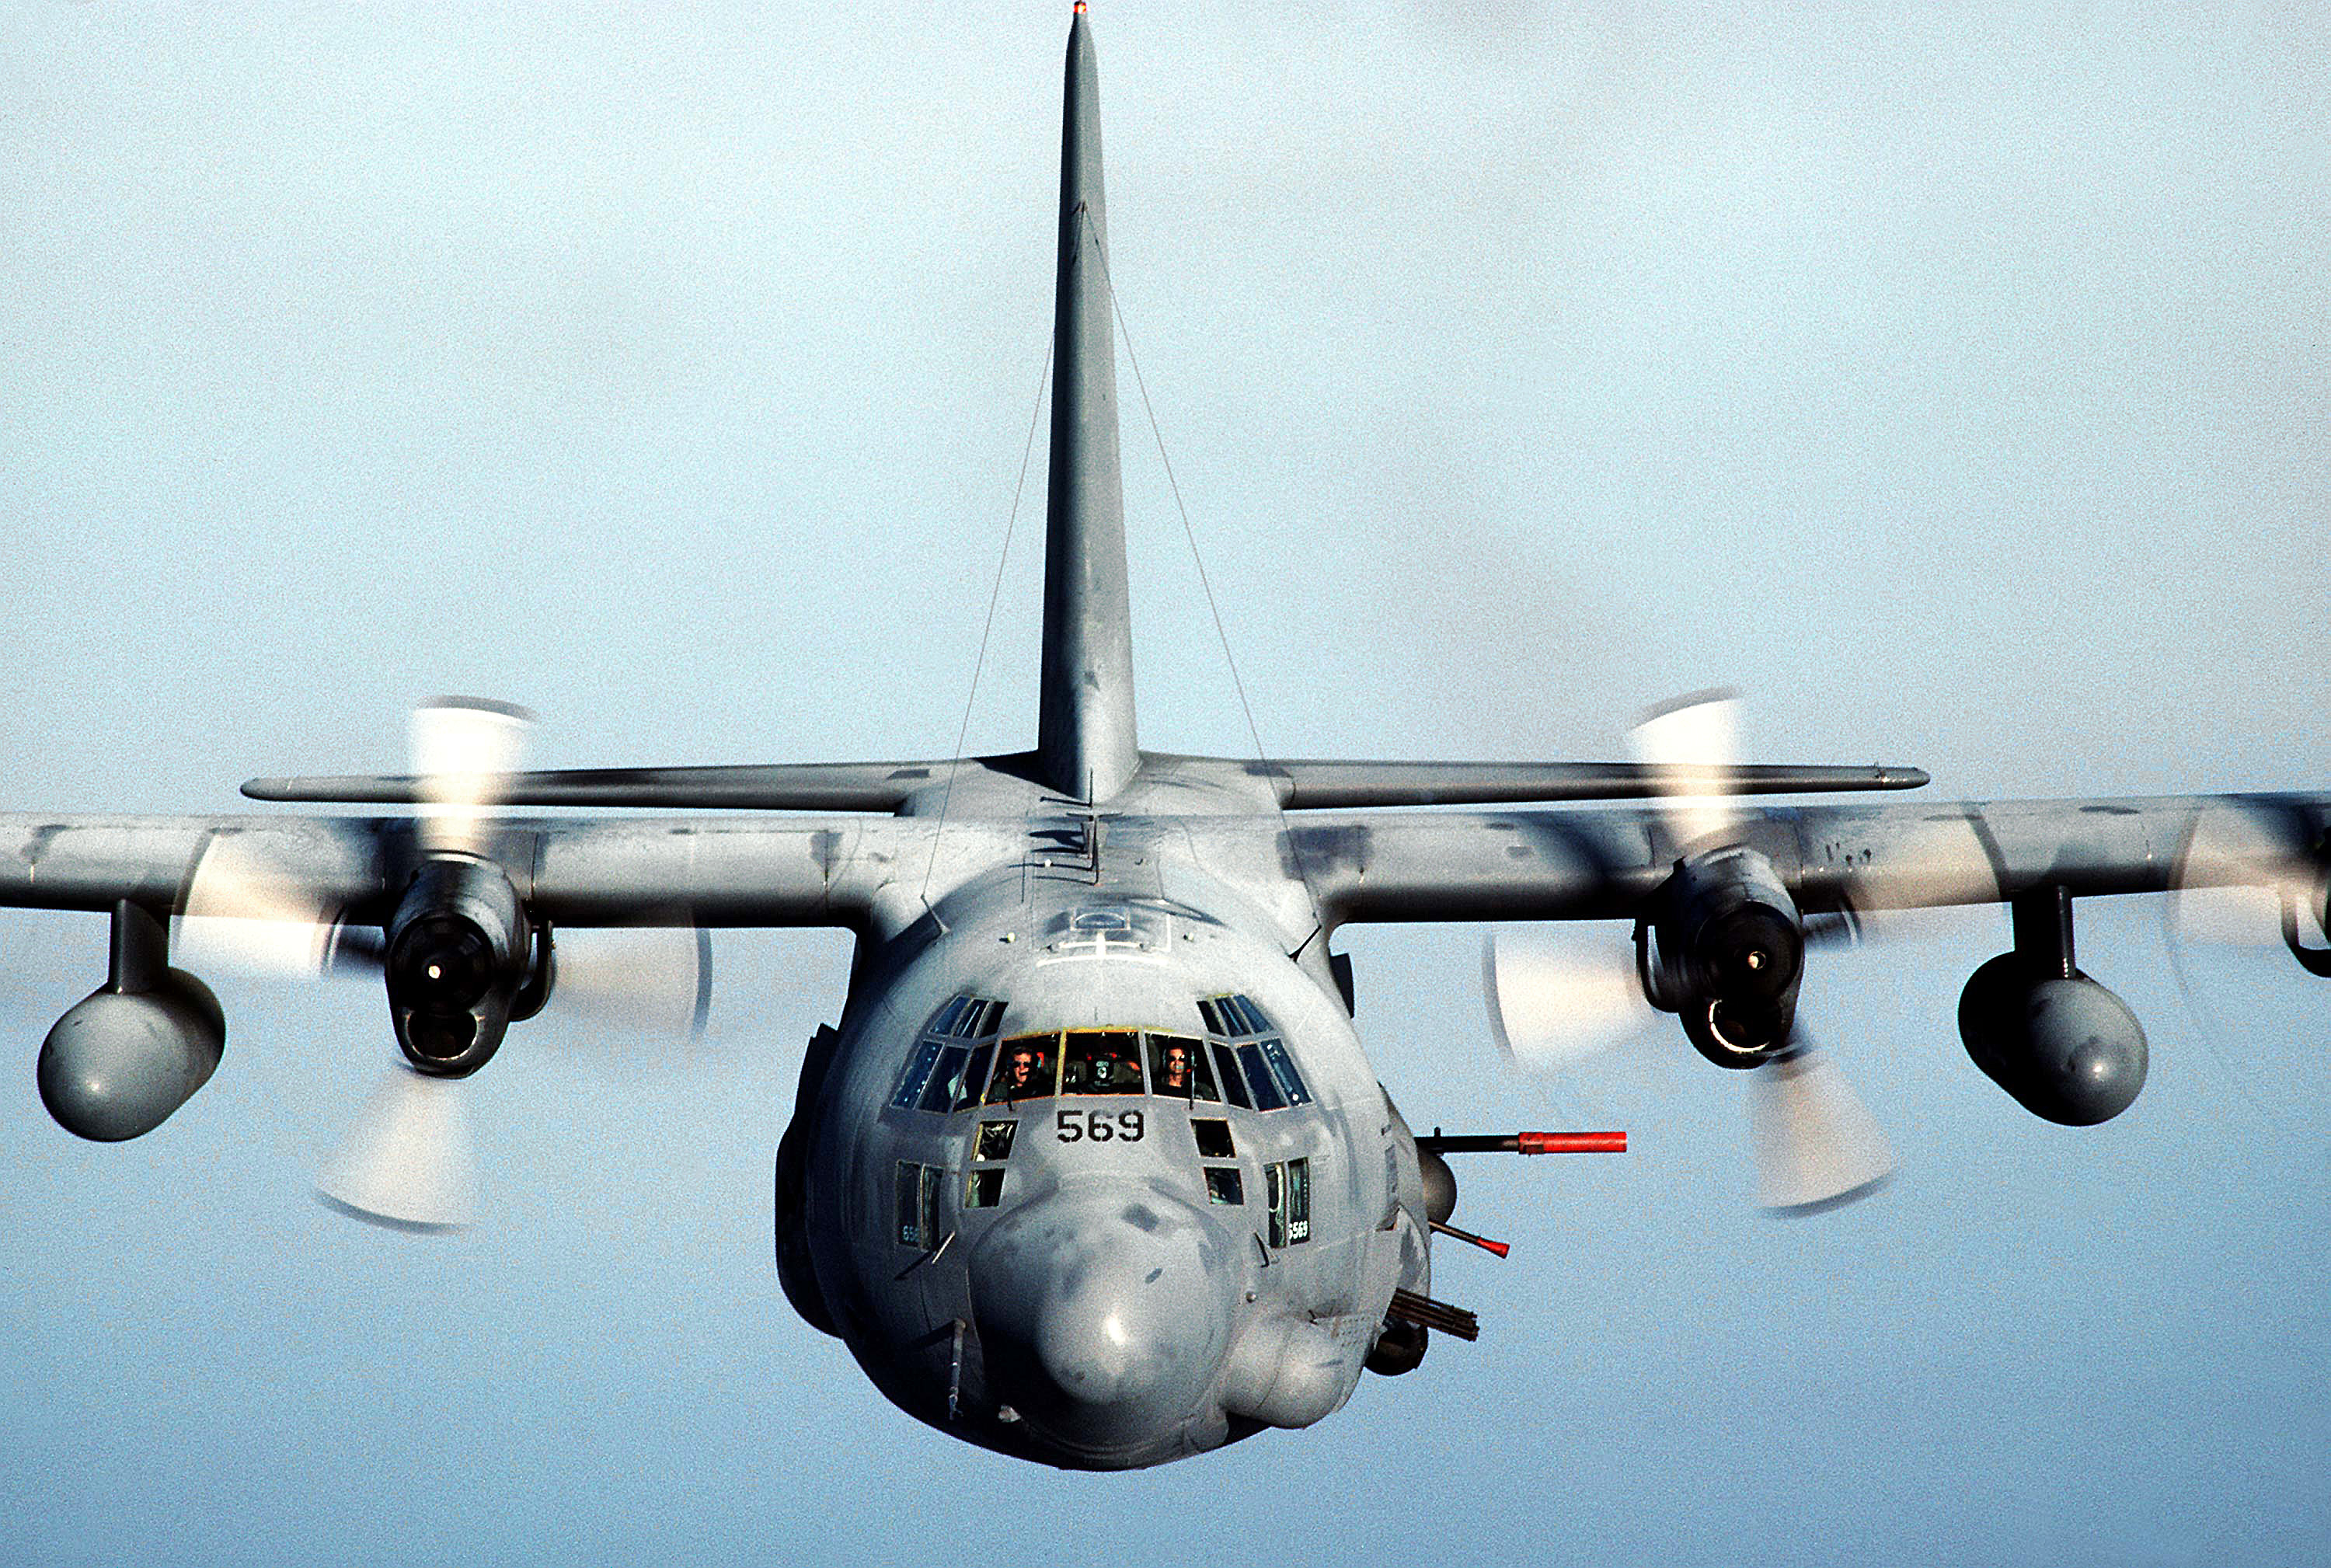 does indian air force have ac130 gunships